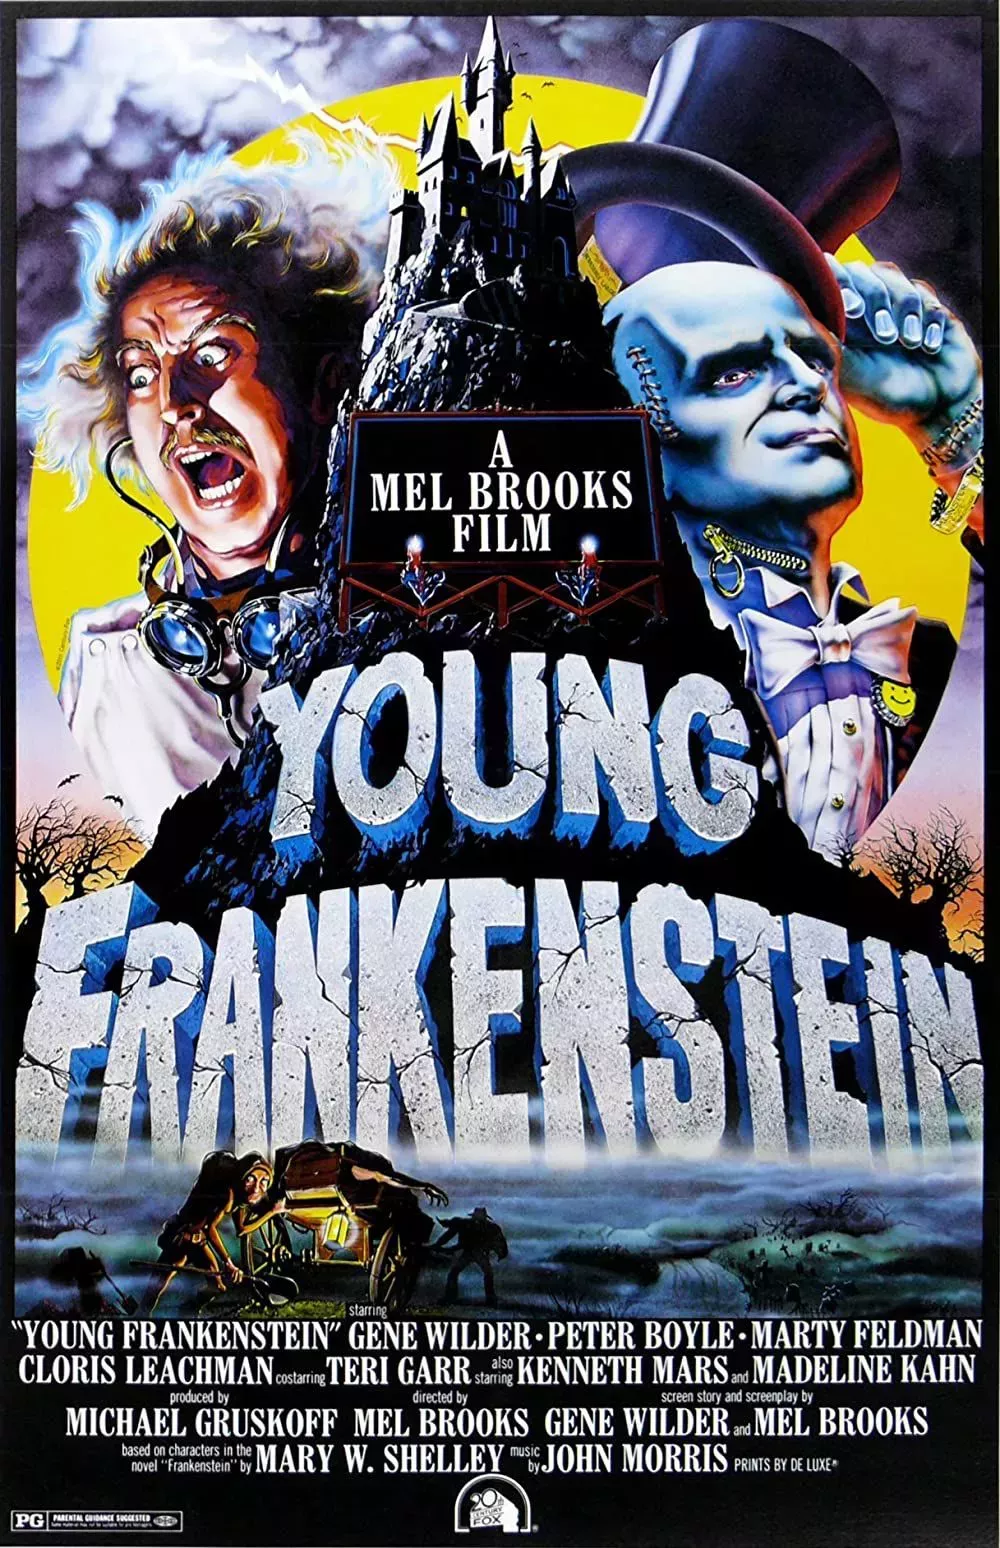 Cover for Young Frankenstein featuring Gene Wilder and Marty Feldman